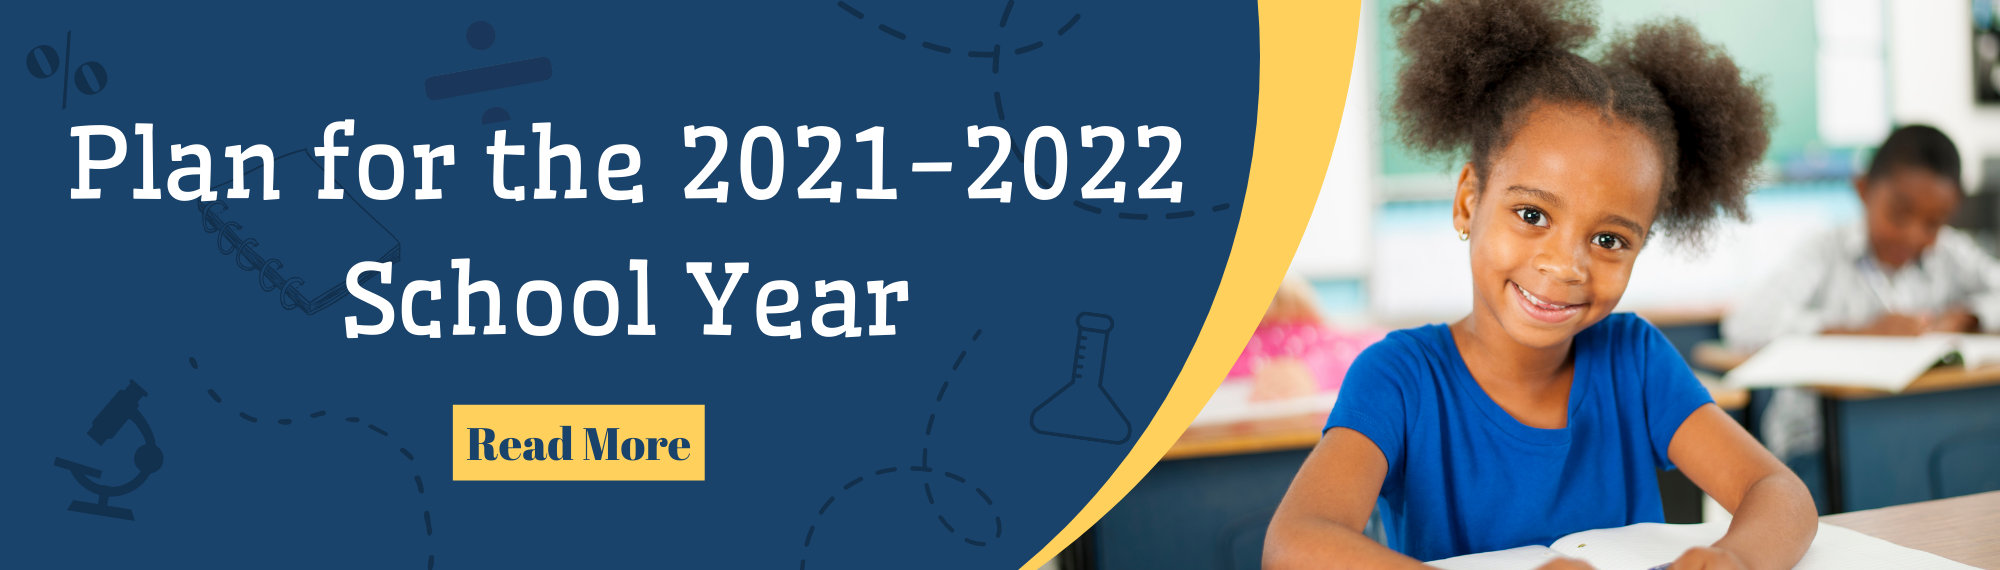 Plan for the 2021-2022 School Year